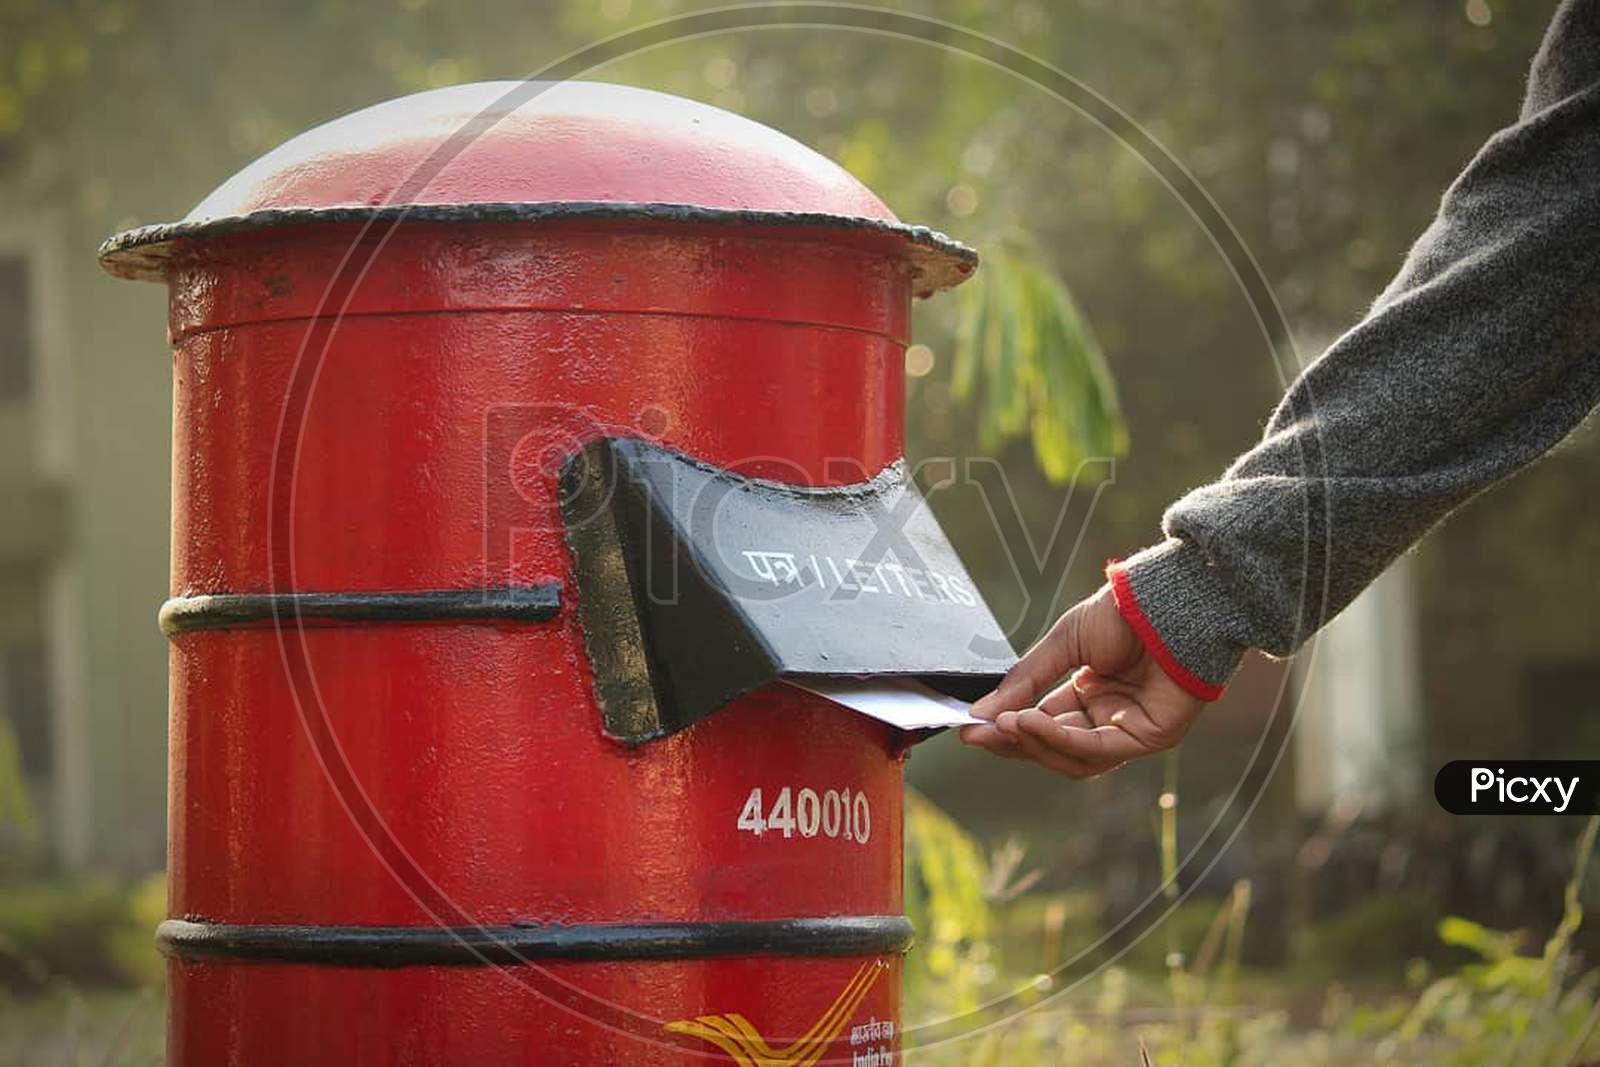 Red Post box from india.